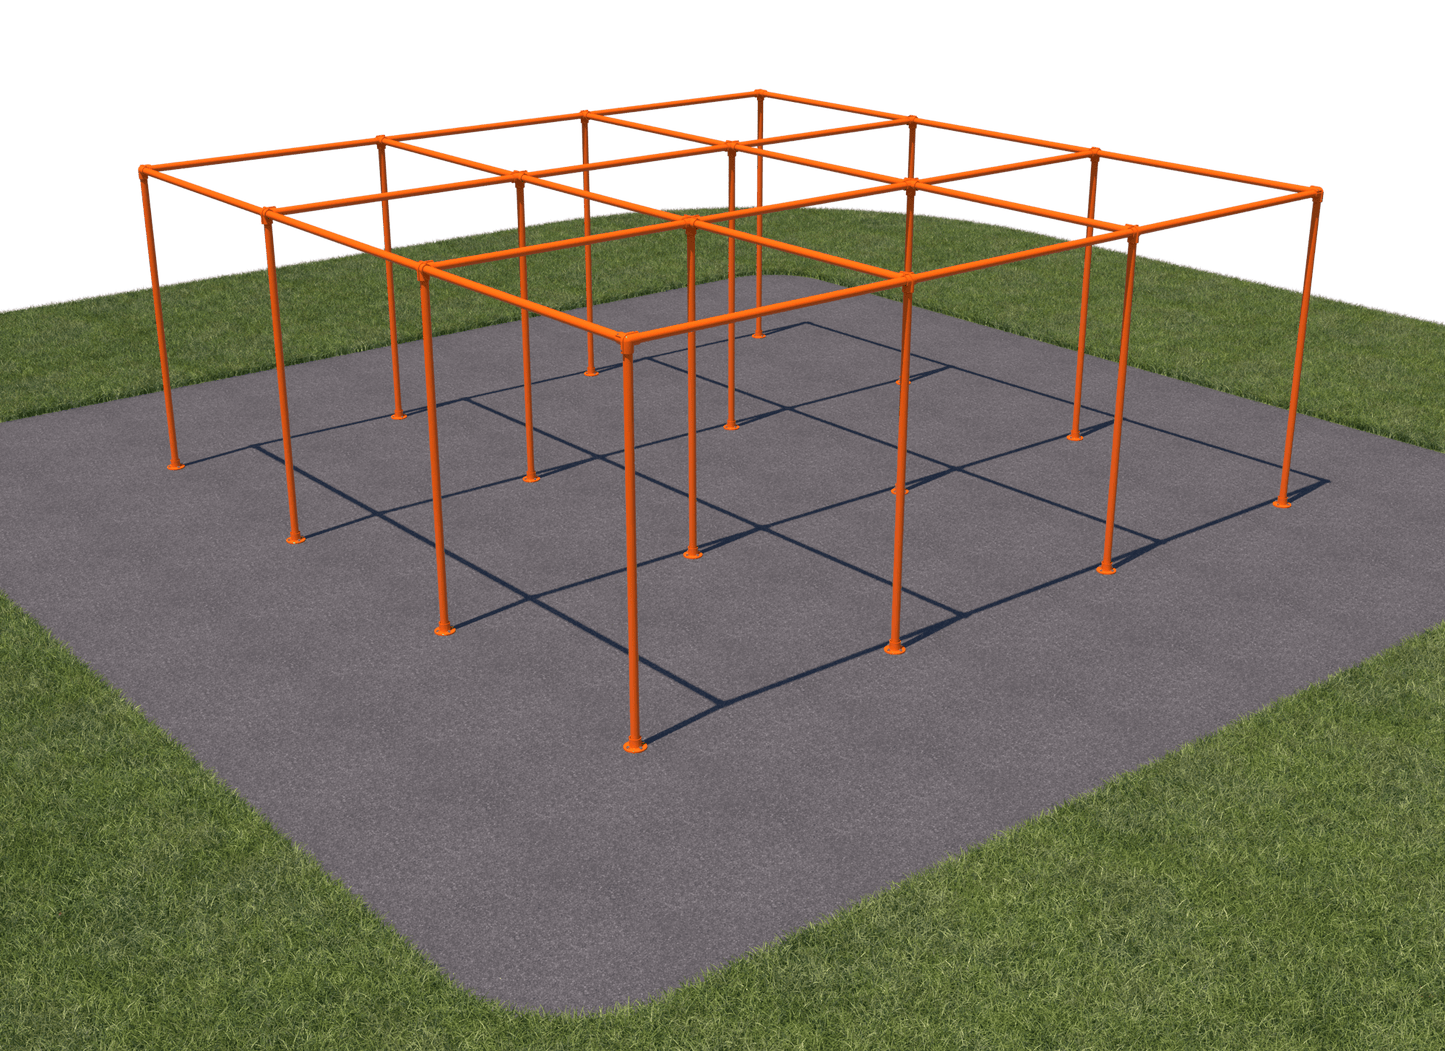 9 Square in the Air: Playground Edition